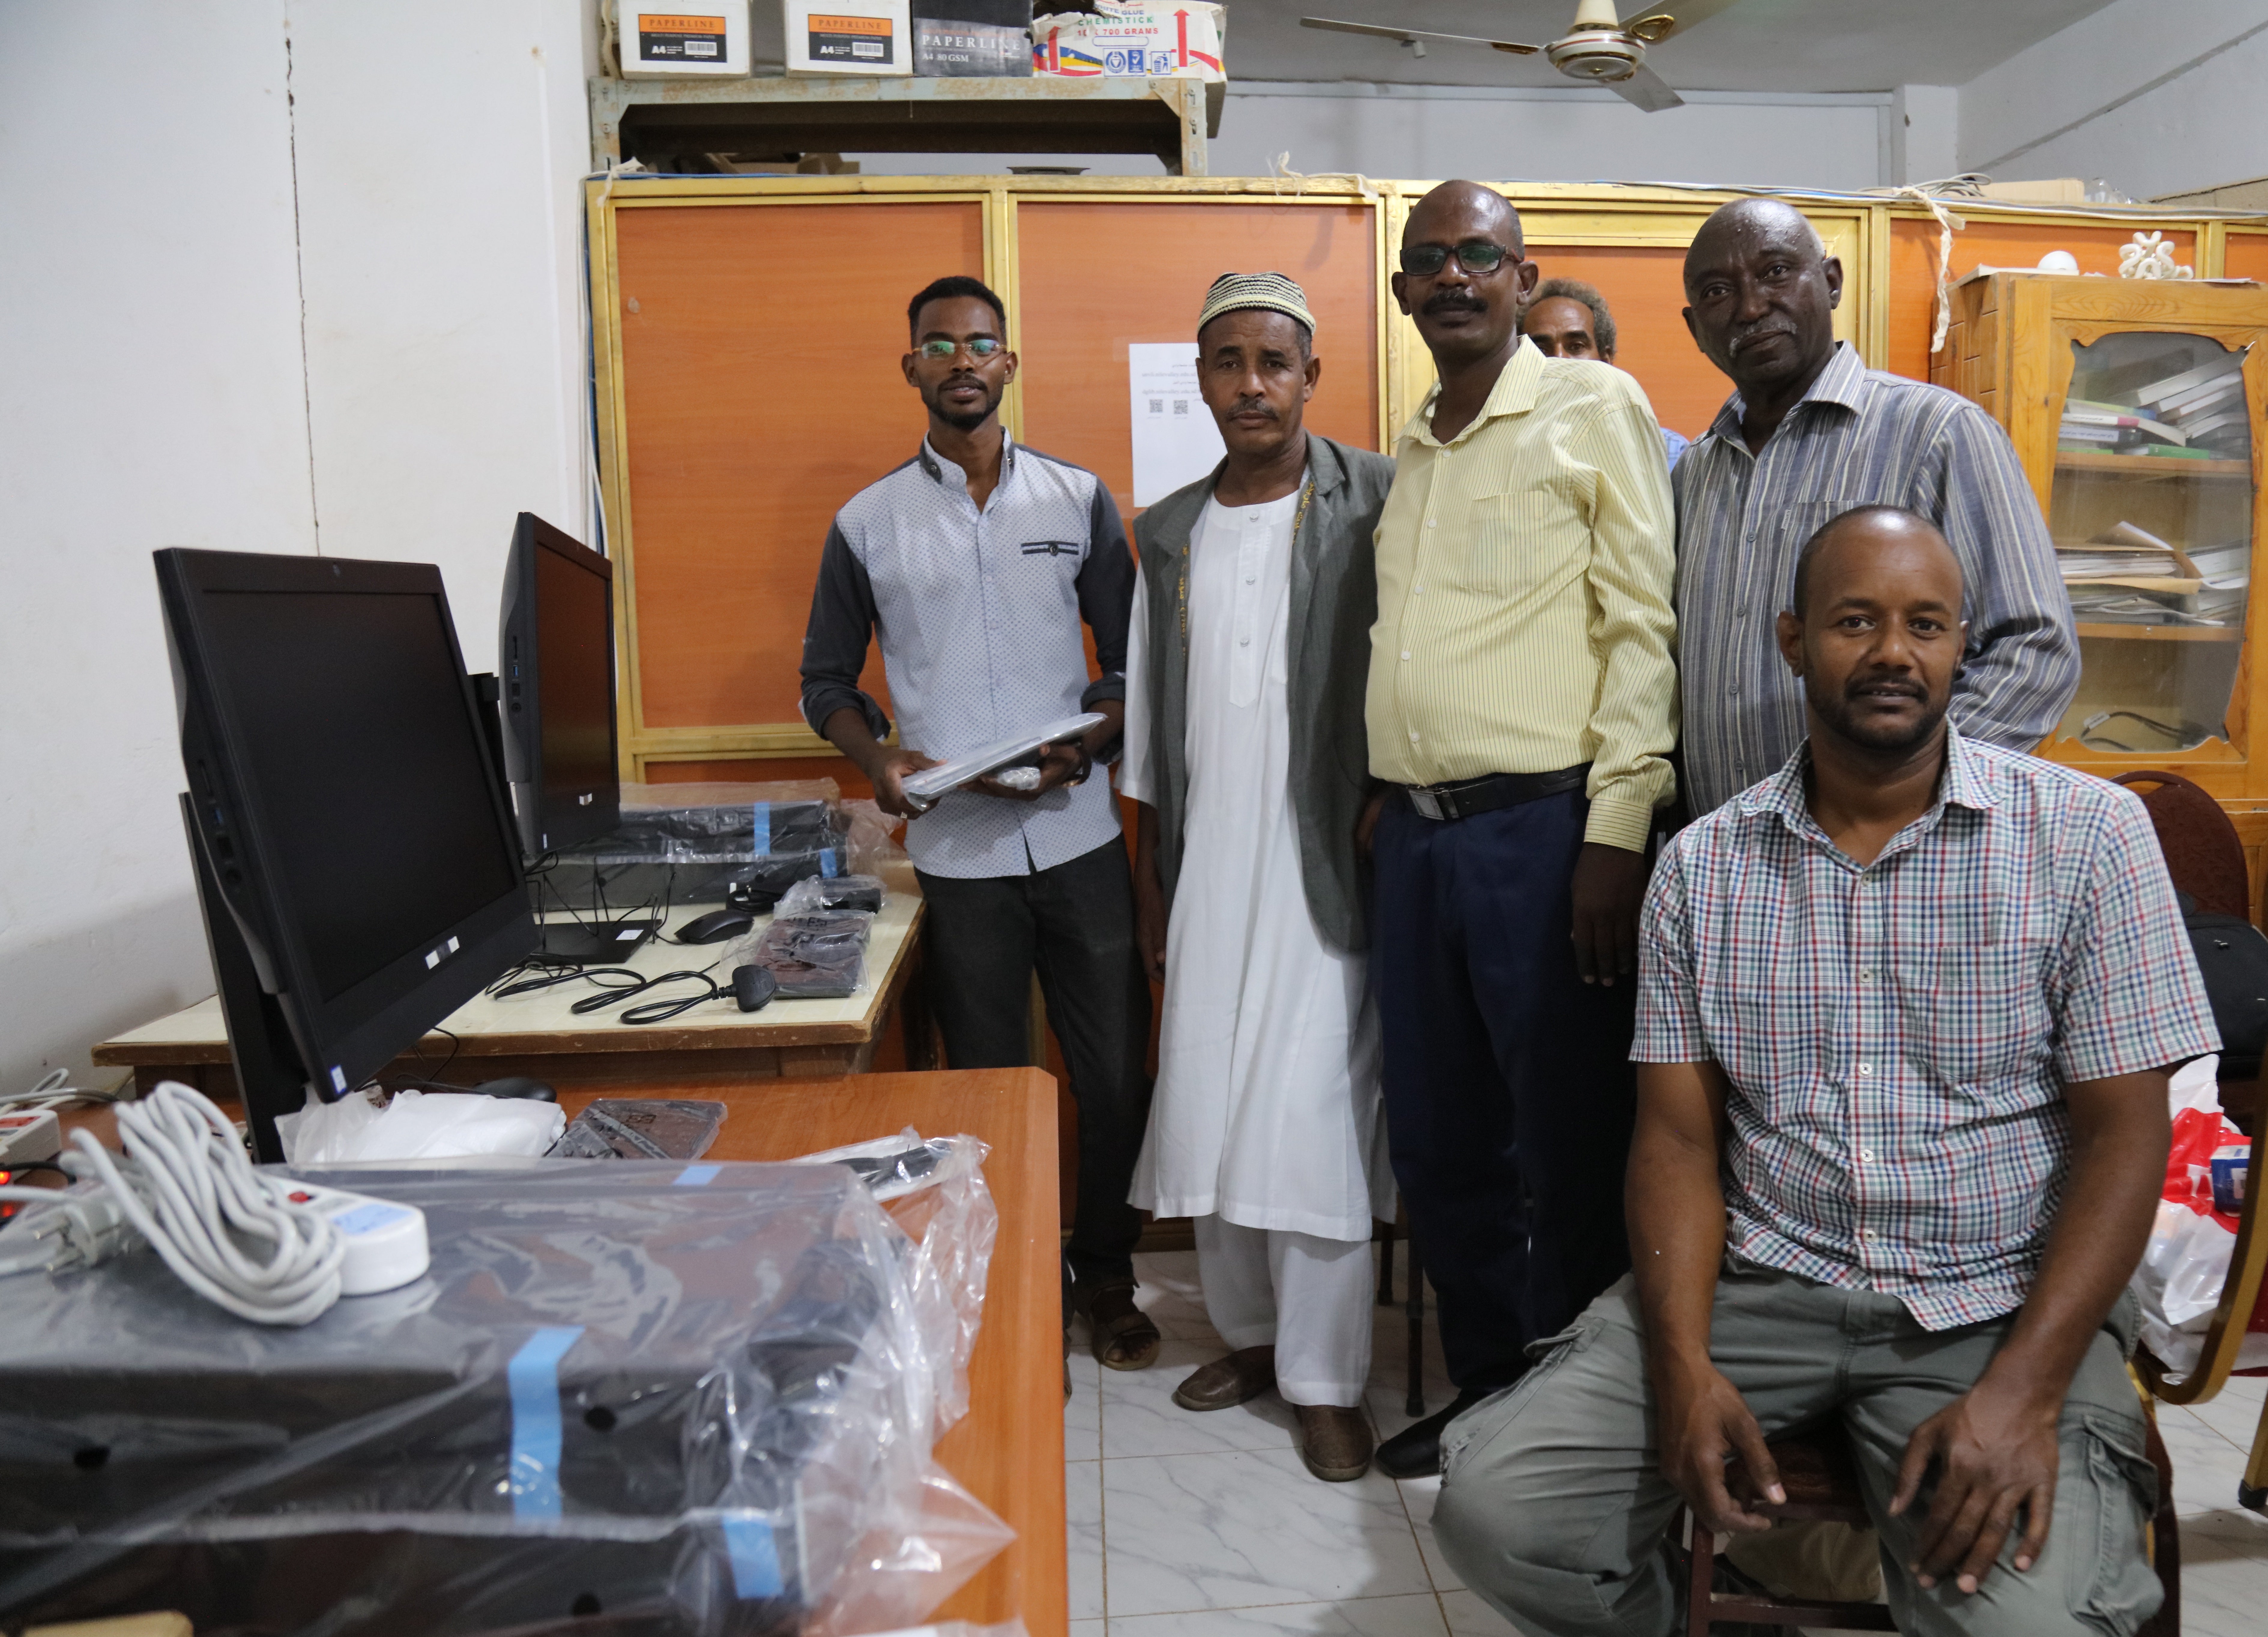 The Sudan Memory team set up scanning centres across the country over the years to enable people to add cultural materials to its growing digital archive